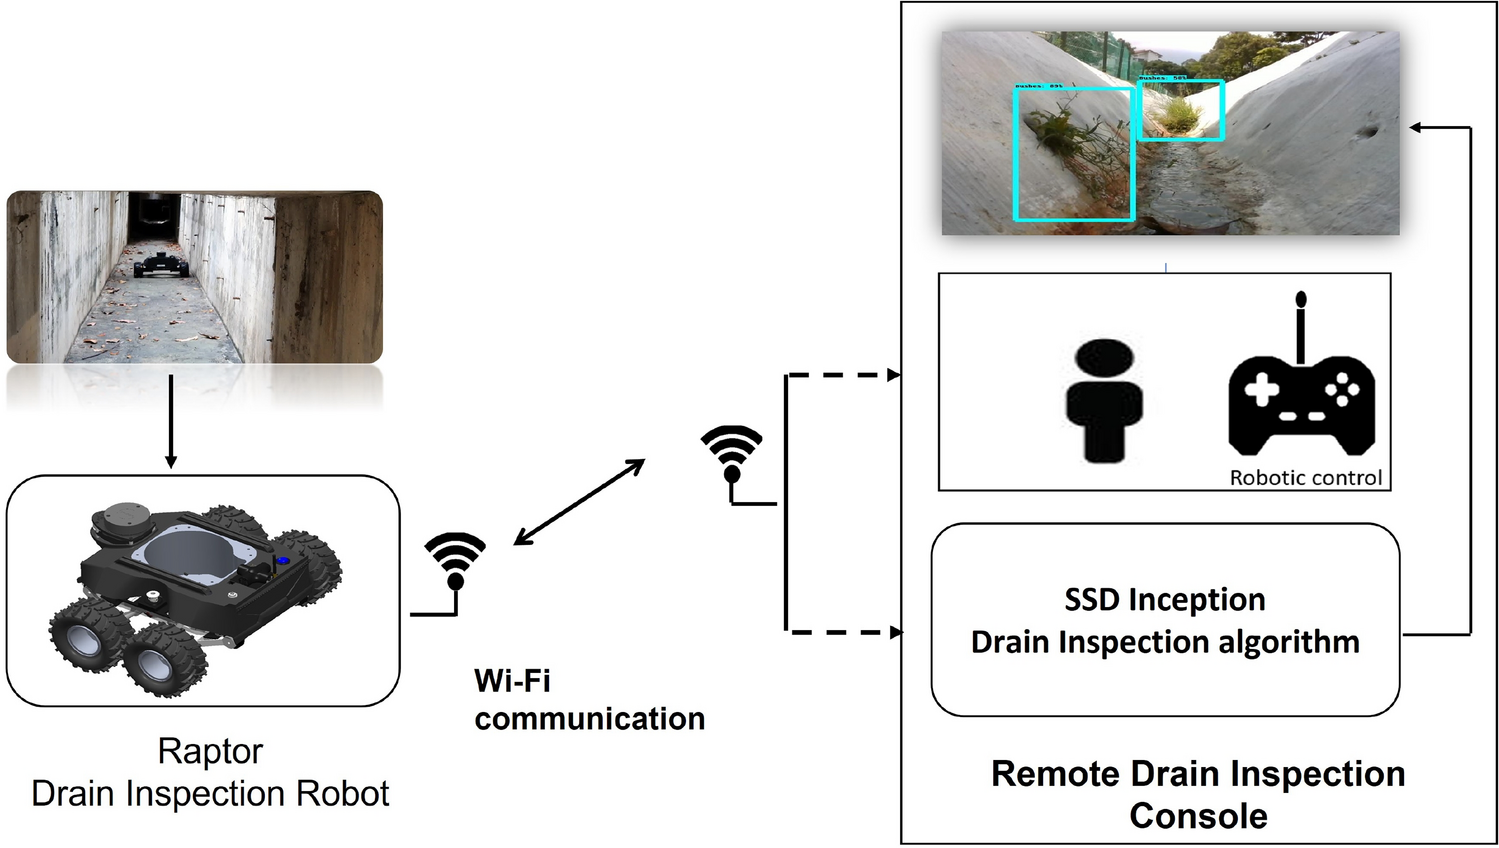 Remote drain inspection framework using the convolutional neural network  and re-configurable robot Raptor